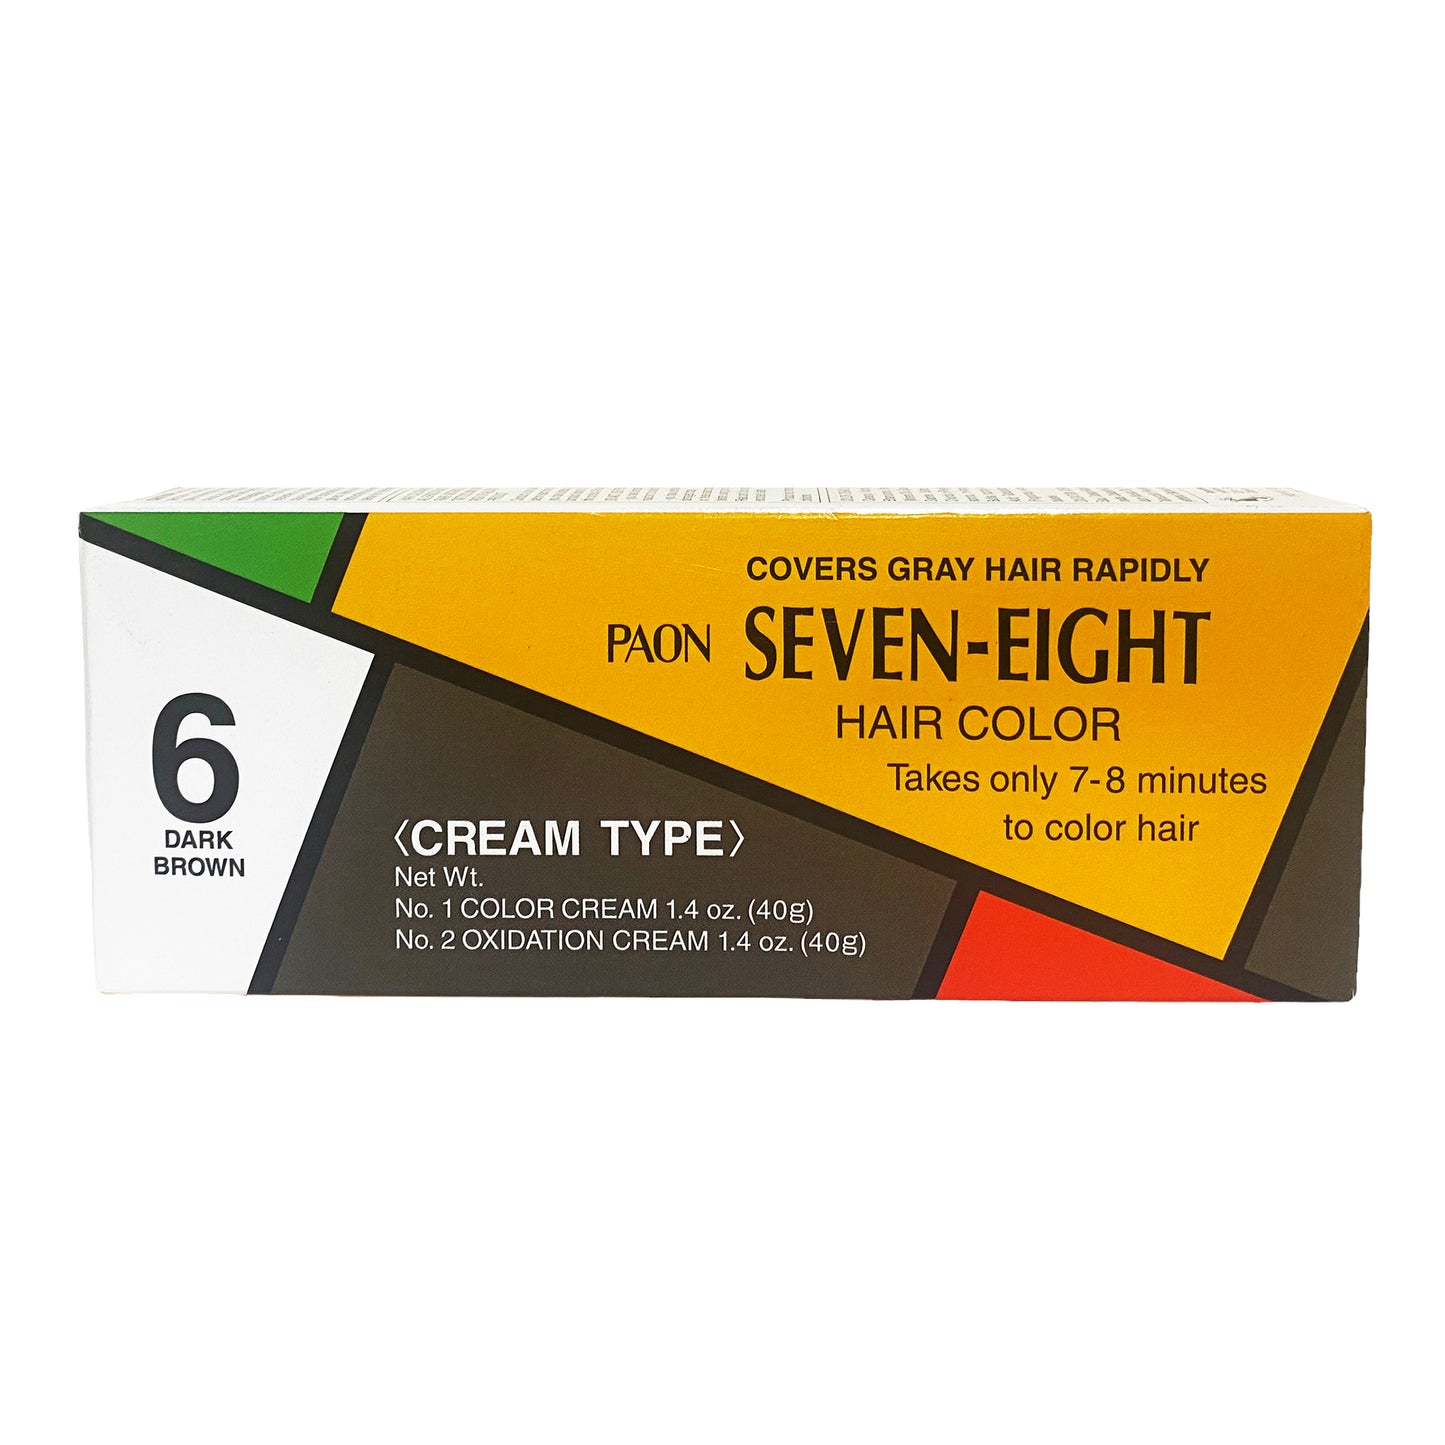 Front graphic view of Paon Seven-Eight Hair Color Cream Type Refill - 6 Dark Brown 2.8oz (80g)